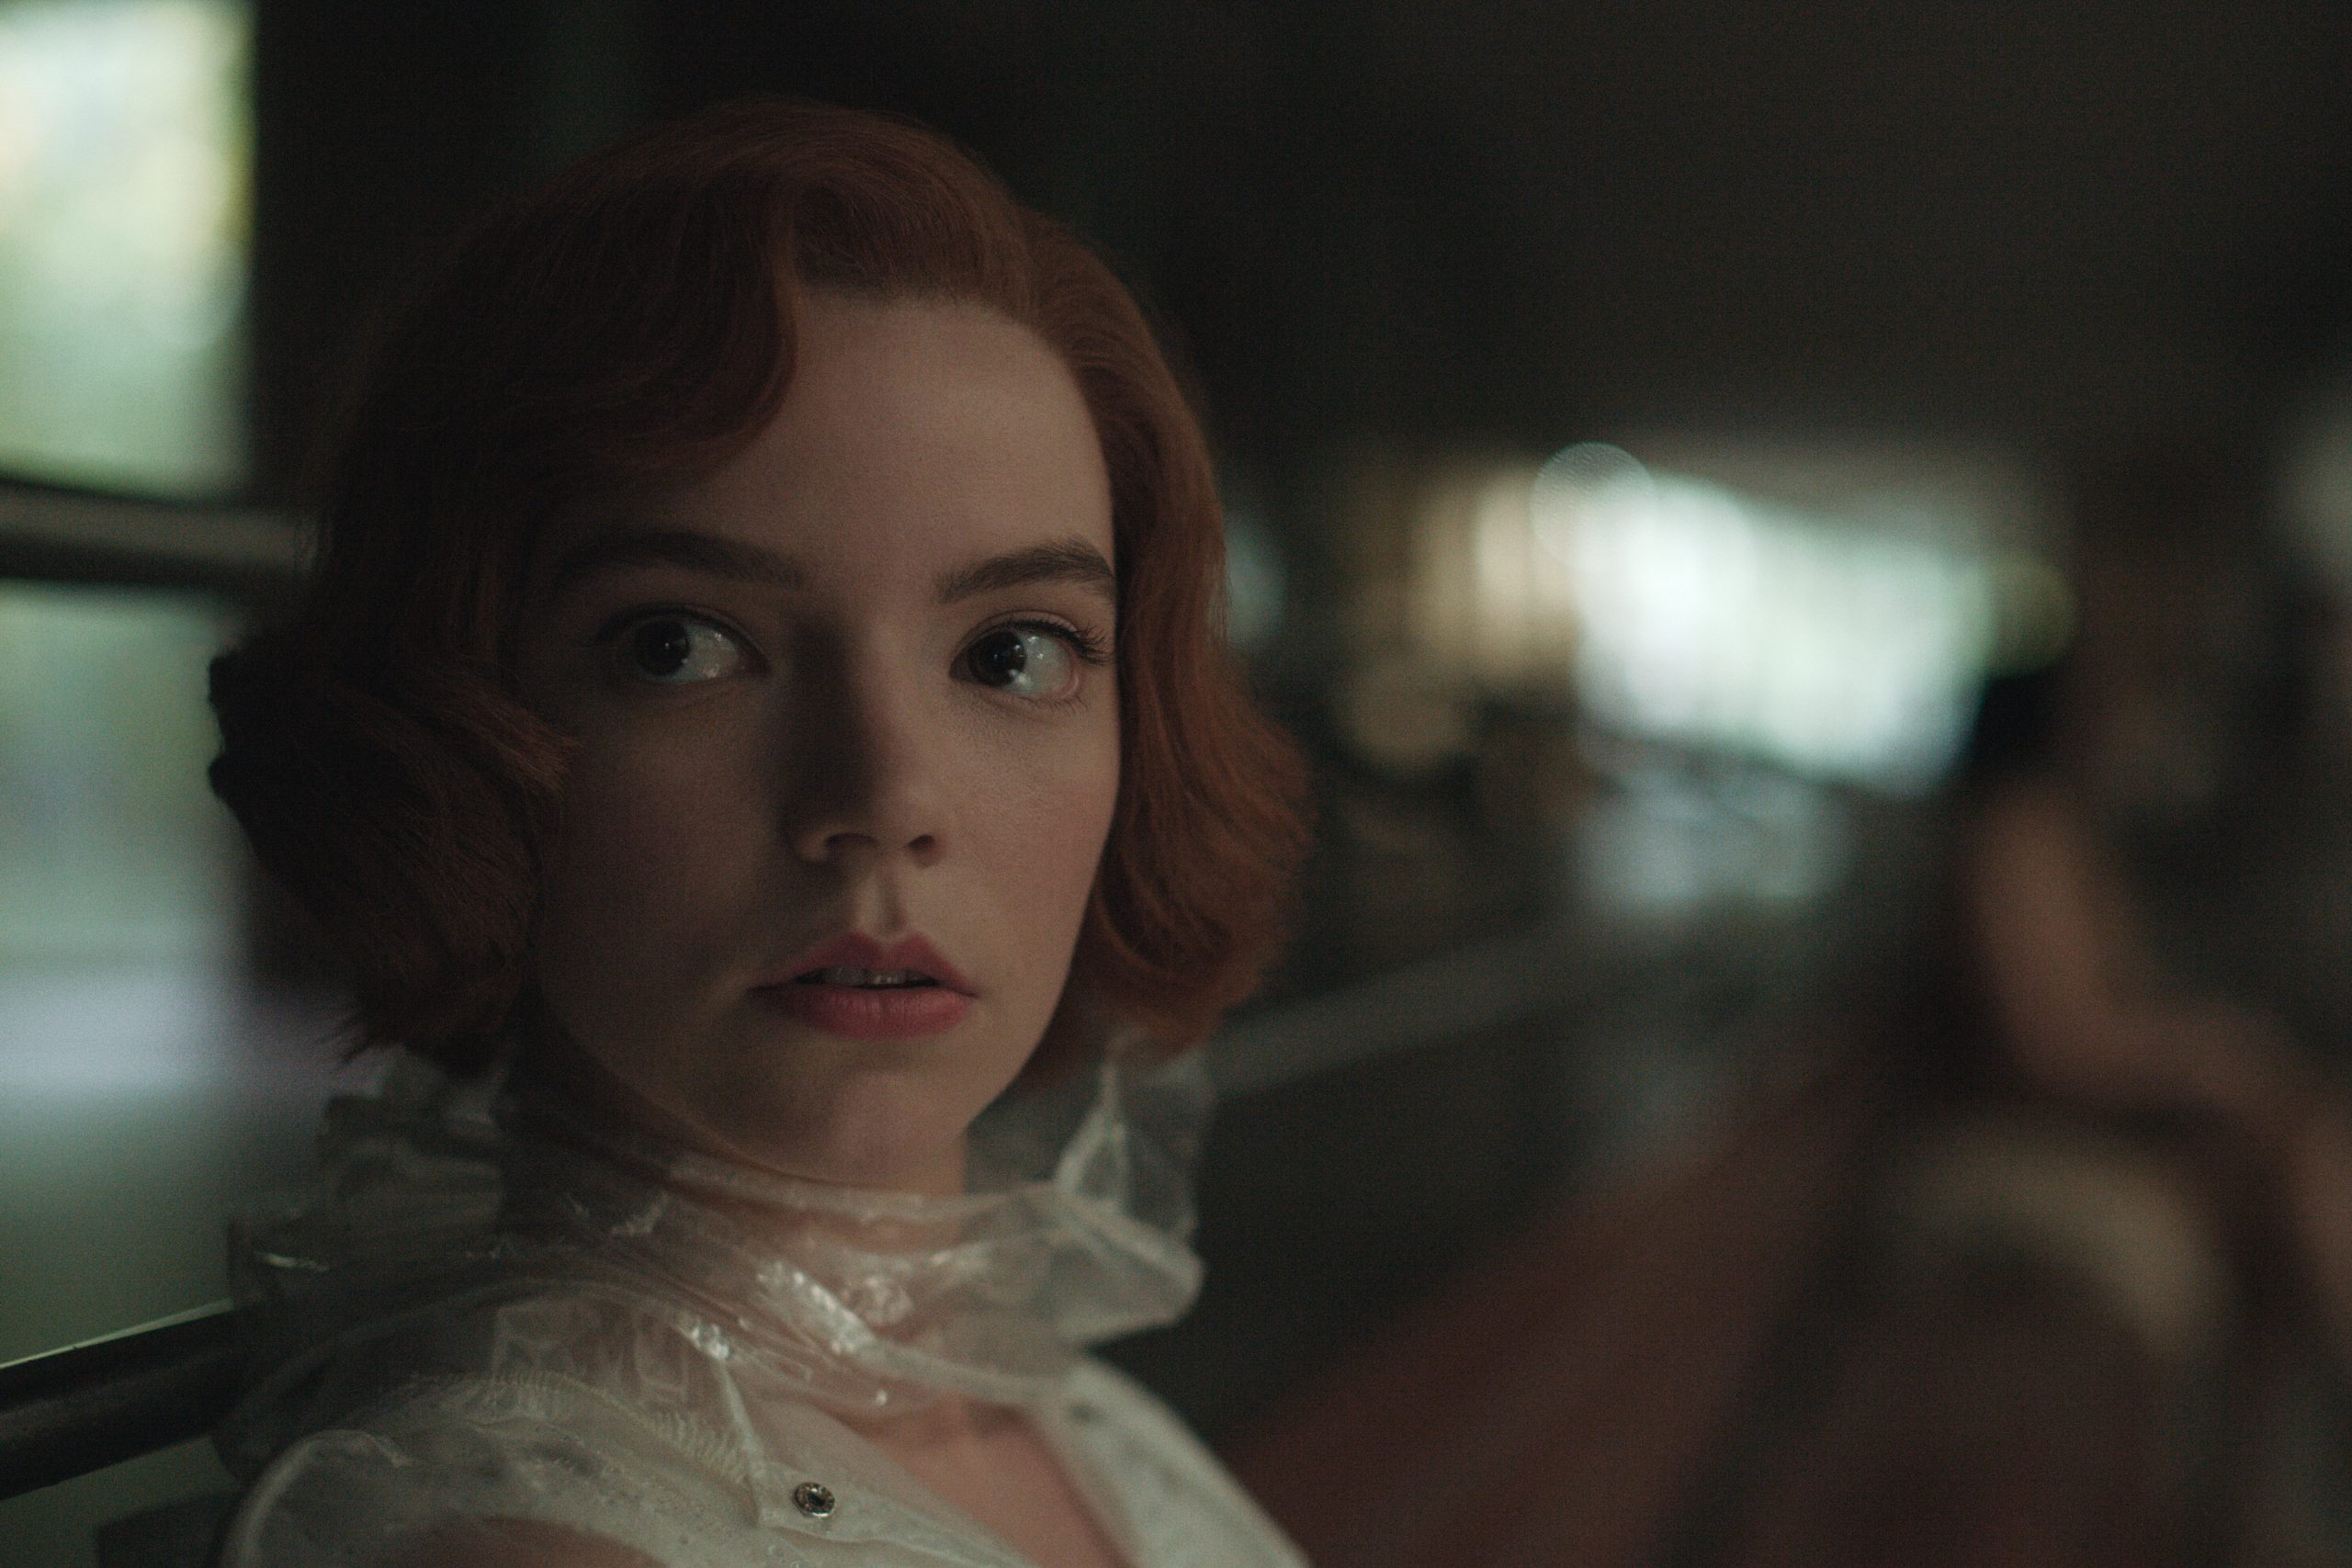 THE QUEEN'S GAMBIT (L to R) ANYA TAYLOR-JOY as BETH HARMON in episode 104 of THE QUEEN'S GAMBIT Cr. COURTESY OF NETFLIX © 2020